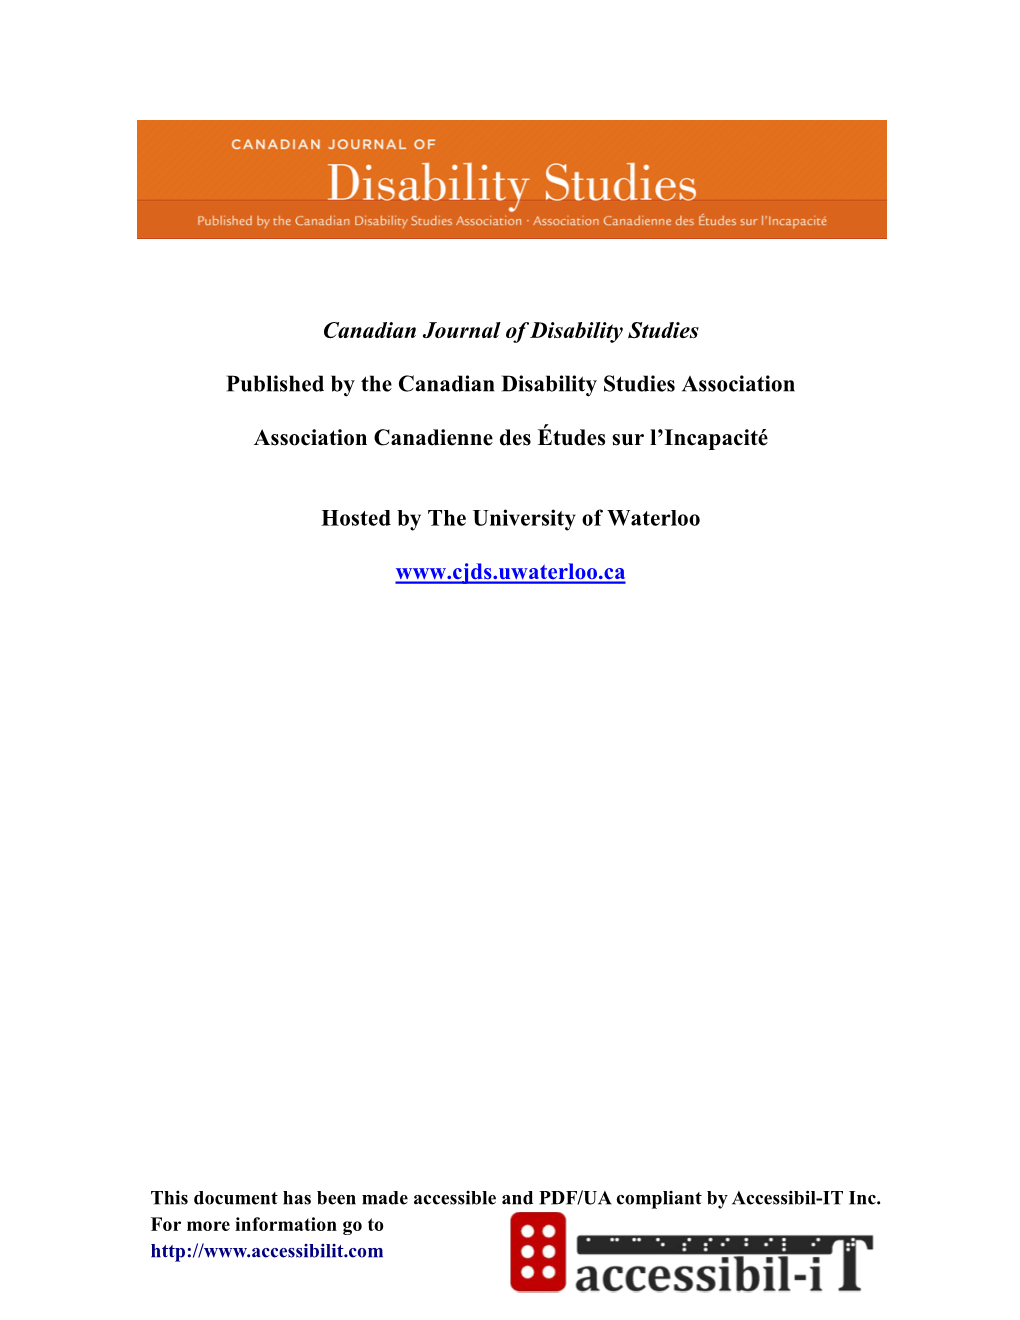 Intersecting Oppressions: African Nova Scotians with Disabilities and Possibilities Arising